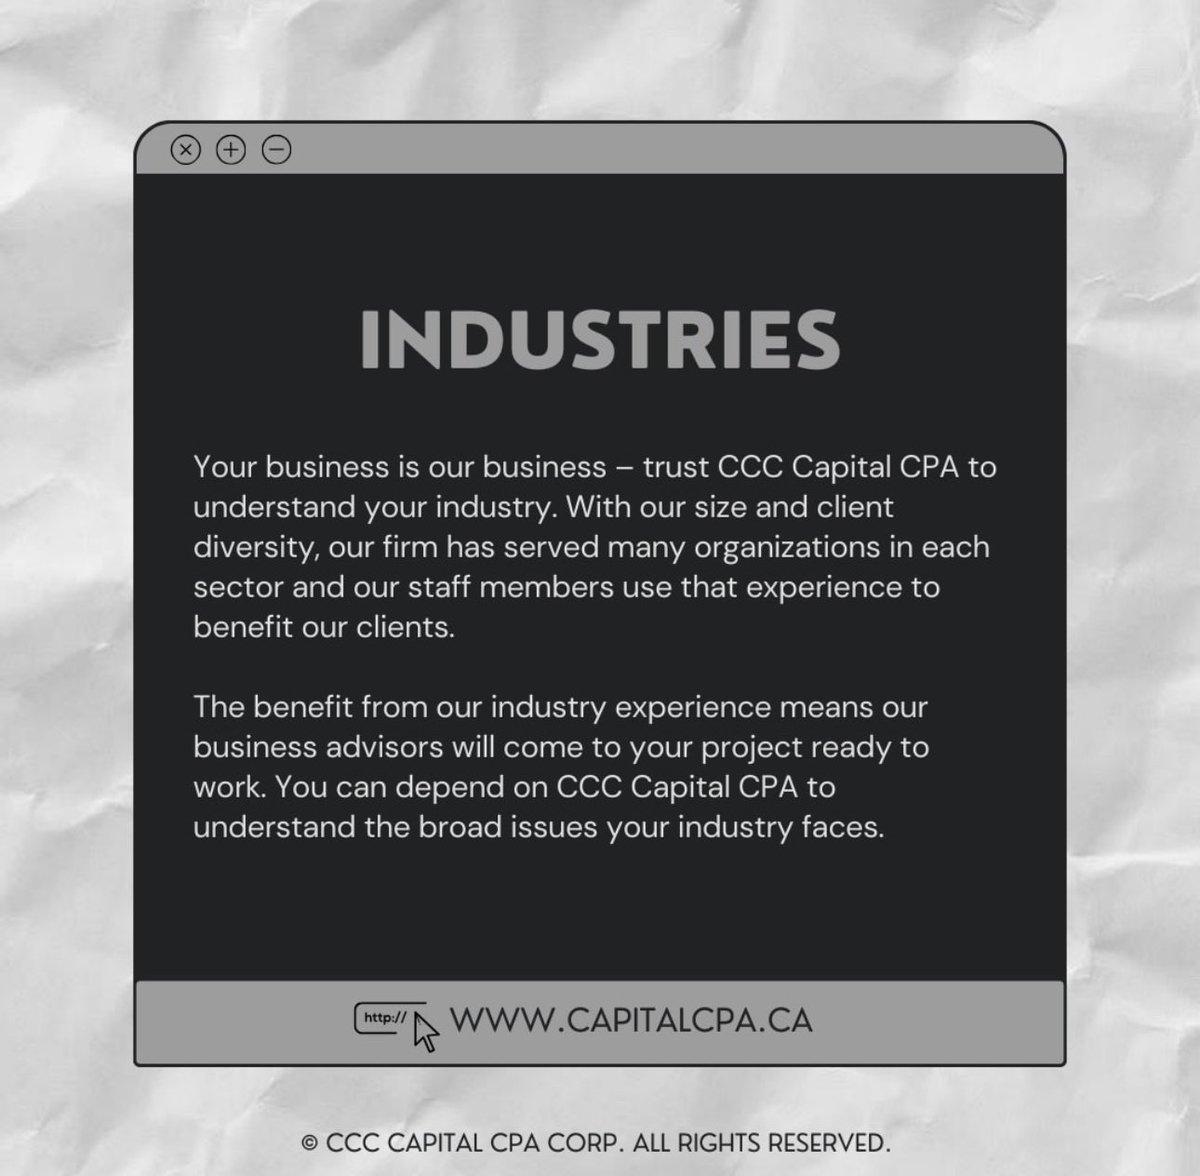 Navigating complex industries requires specialized knowledge. 

At CCC Capital CPA, we understand the unique challenges and opportunities within various sectors. 

Let's tailor solutions to fit your industry's needs. 💡

#IndustryInsights #SectorSpecialists #CCCcapitalCPA